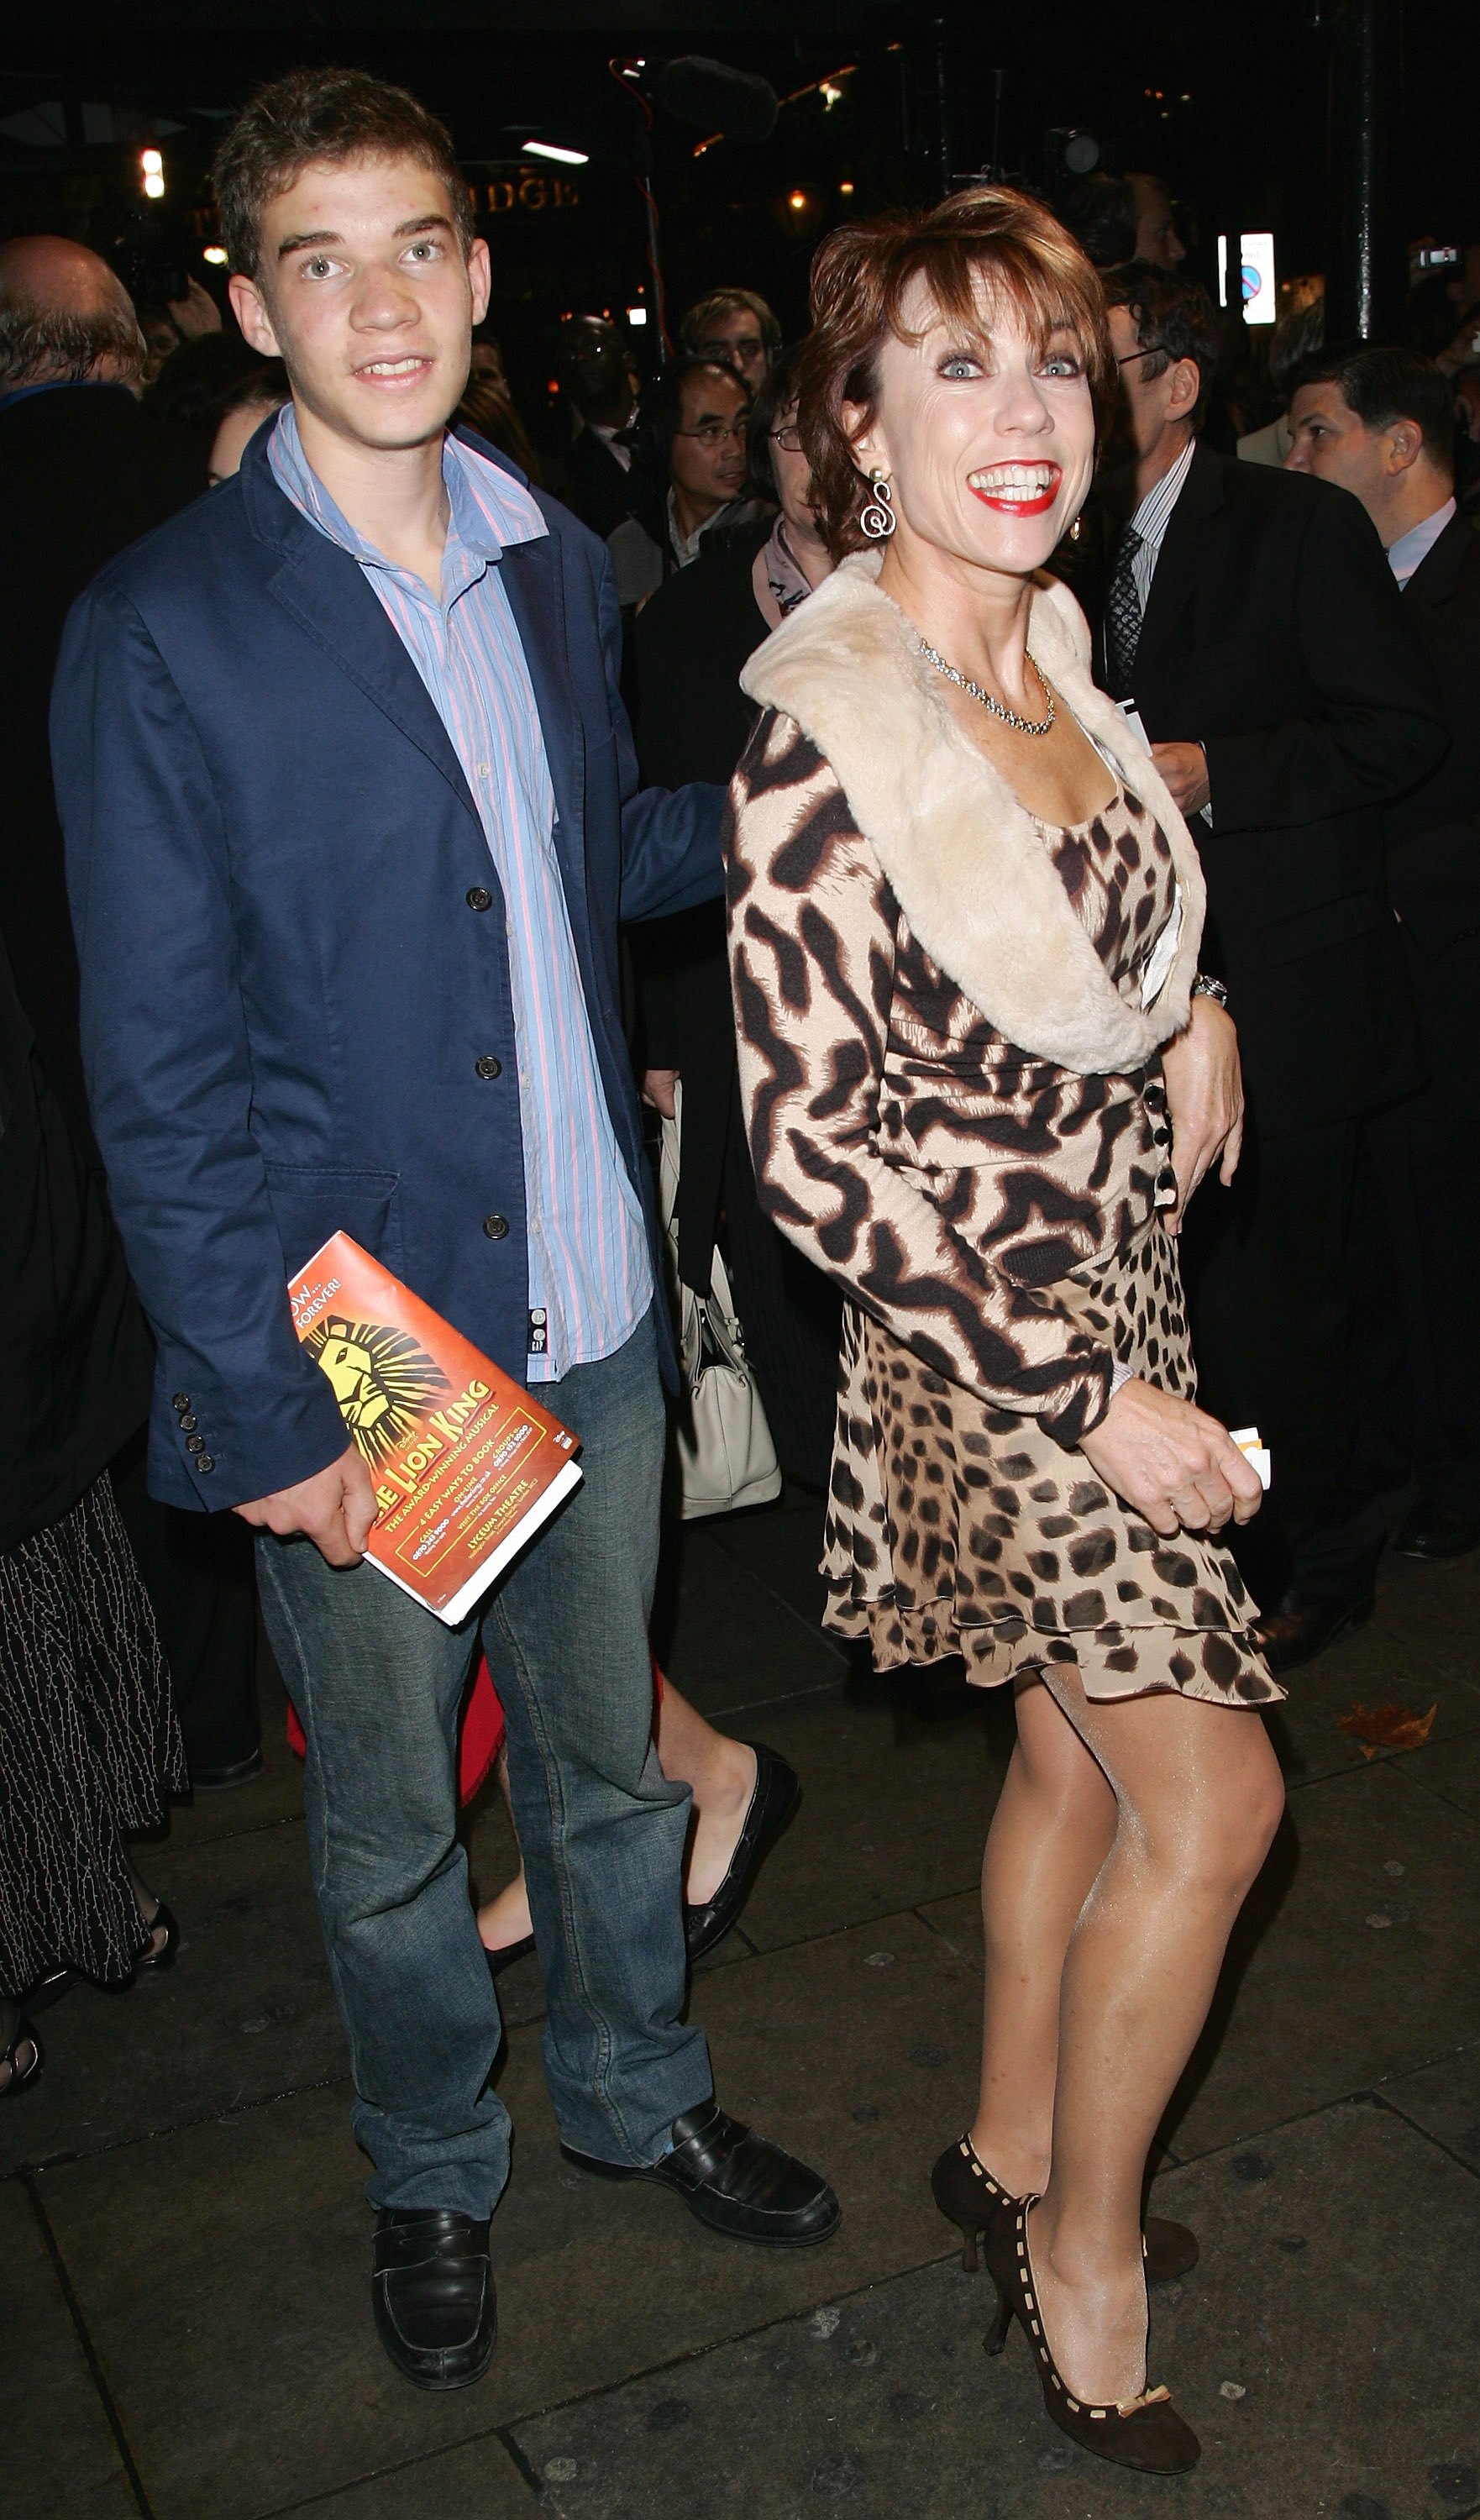 Woman with short brown hair wears cheetah print short dress on red carpet next to her teenage son who holds a theatre playbook